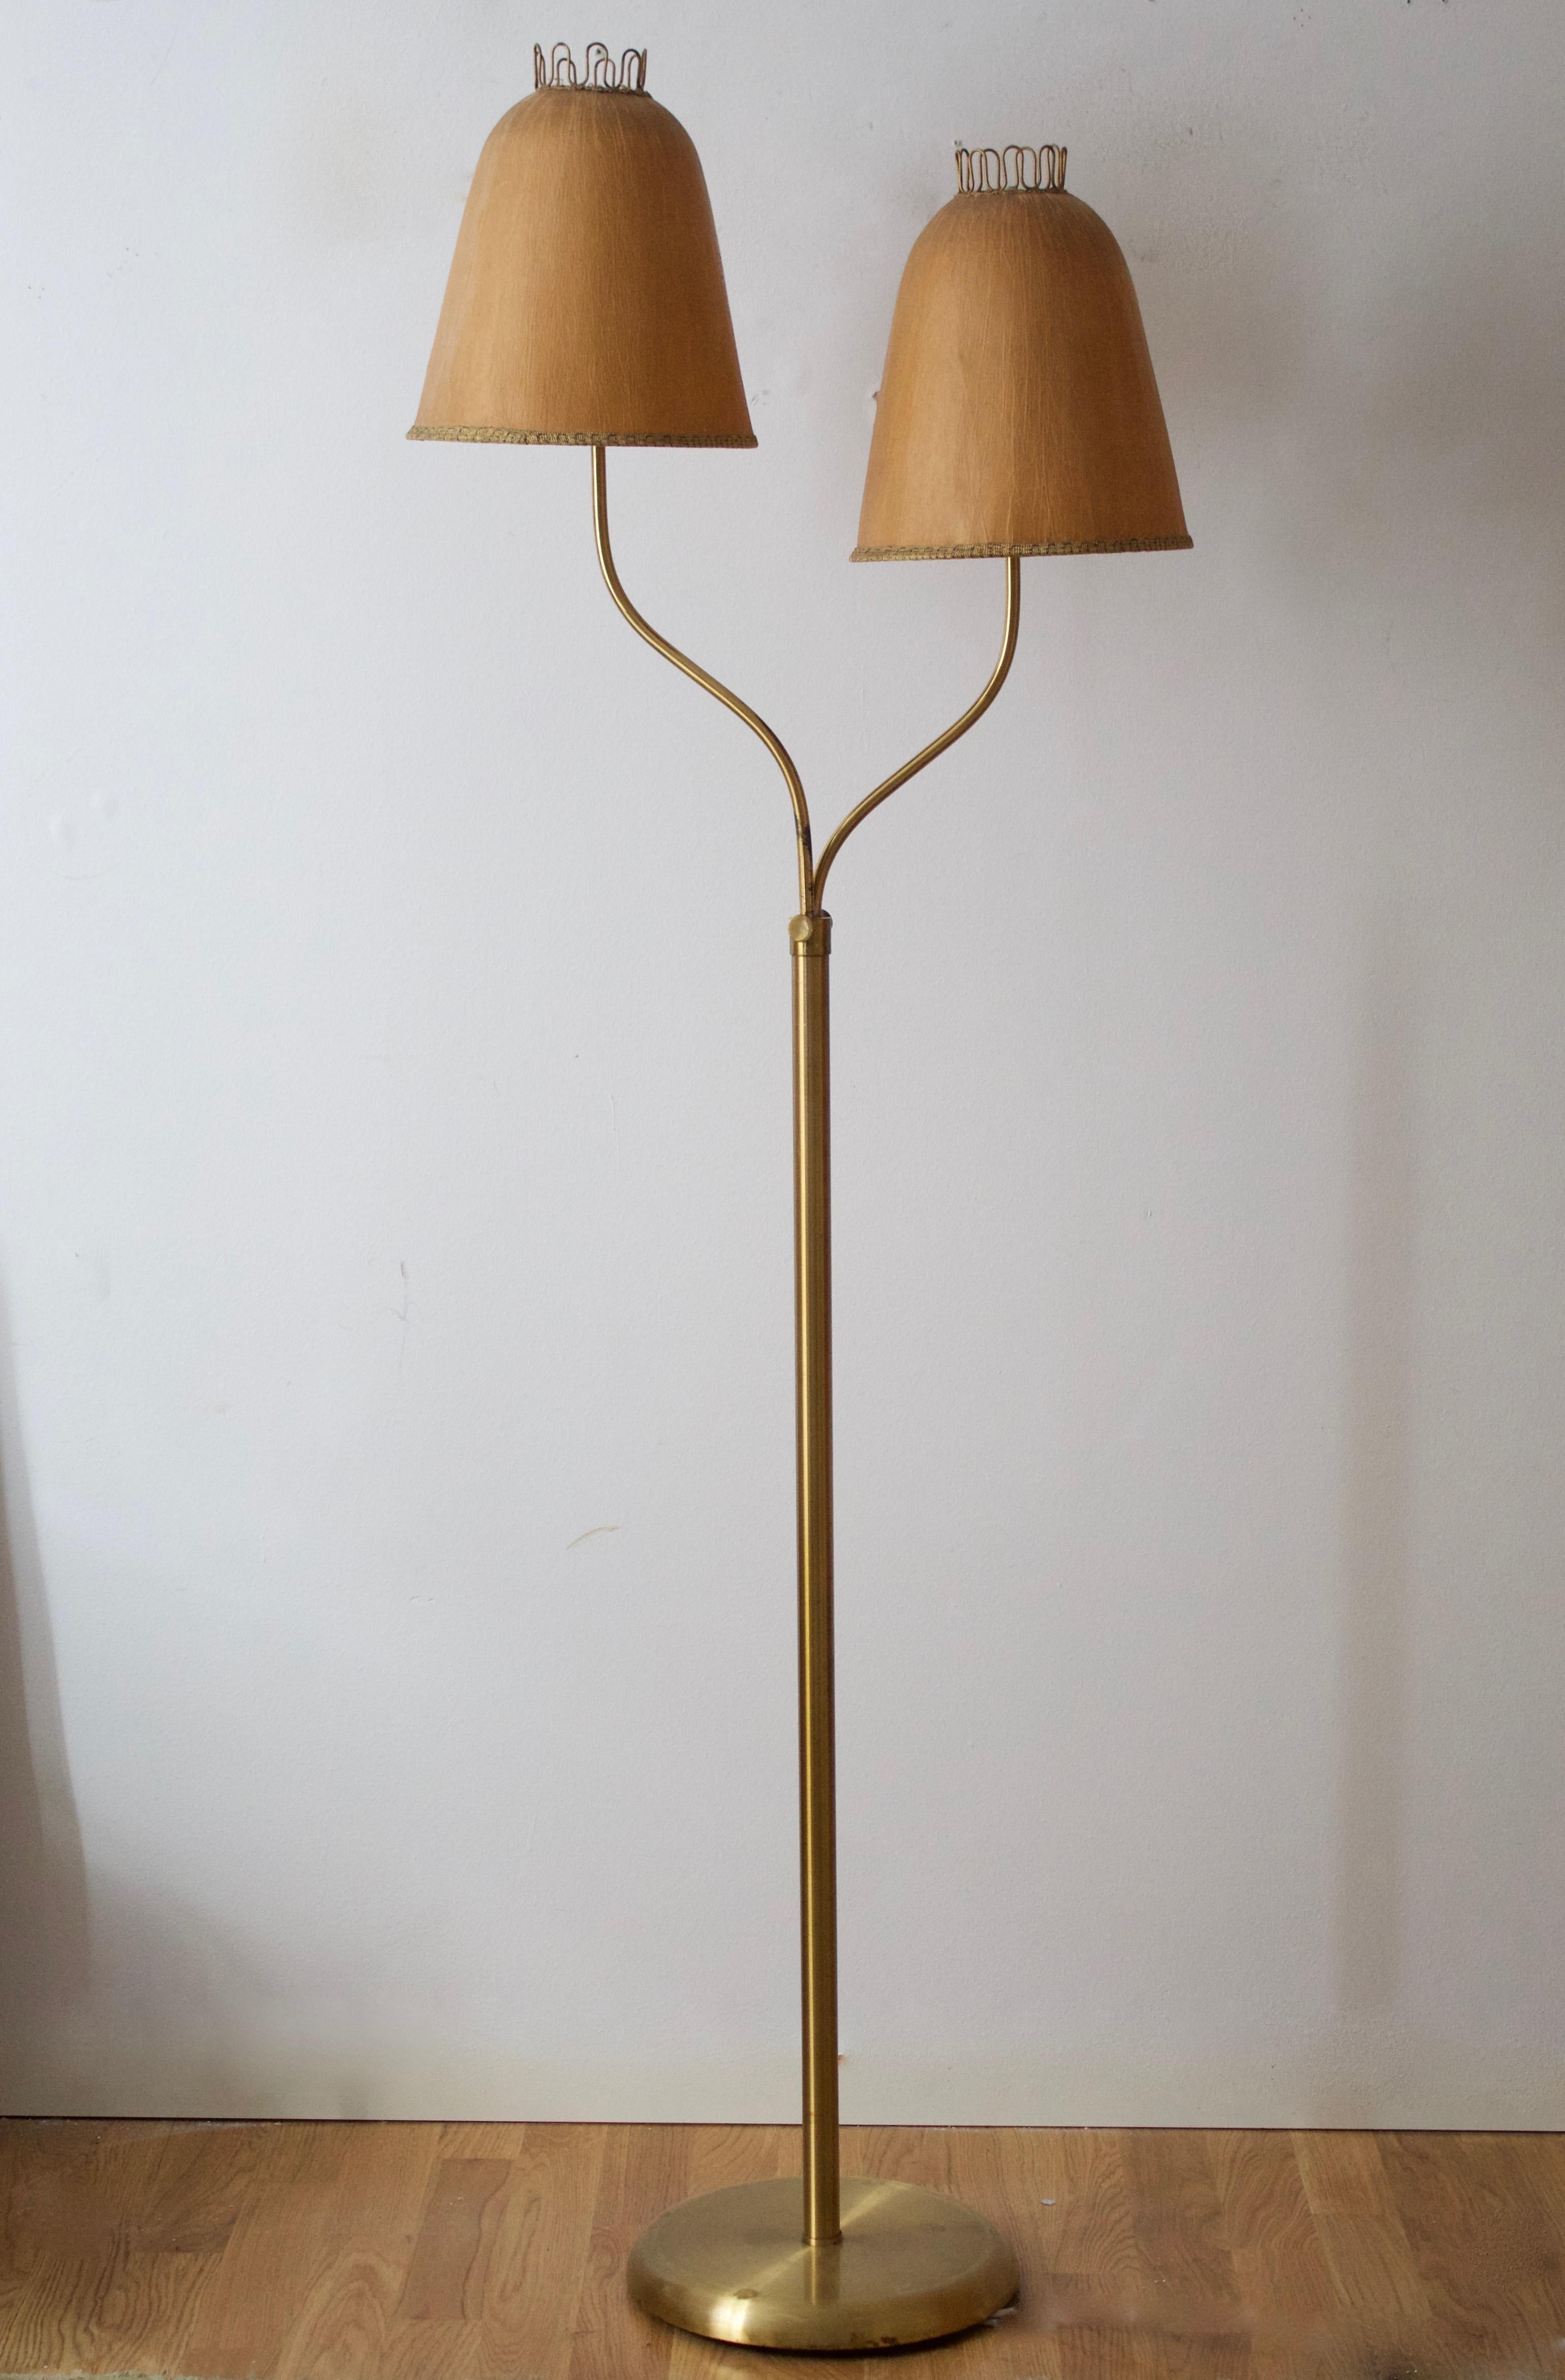 A two-armed floor lamp, designed and produced in Sweden, 1930s-1940s. Features brass, and it's original papier mache lampshades. Dimensions variable

Other designers of the period include Jean Royère, Paolo Buffa, Josef Frank, Jacques Adnet, and